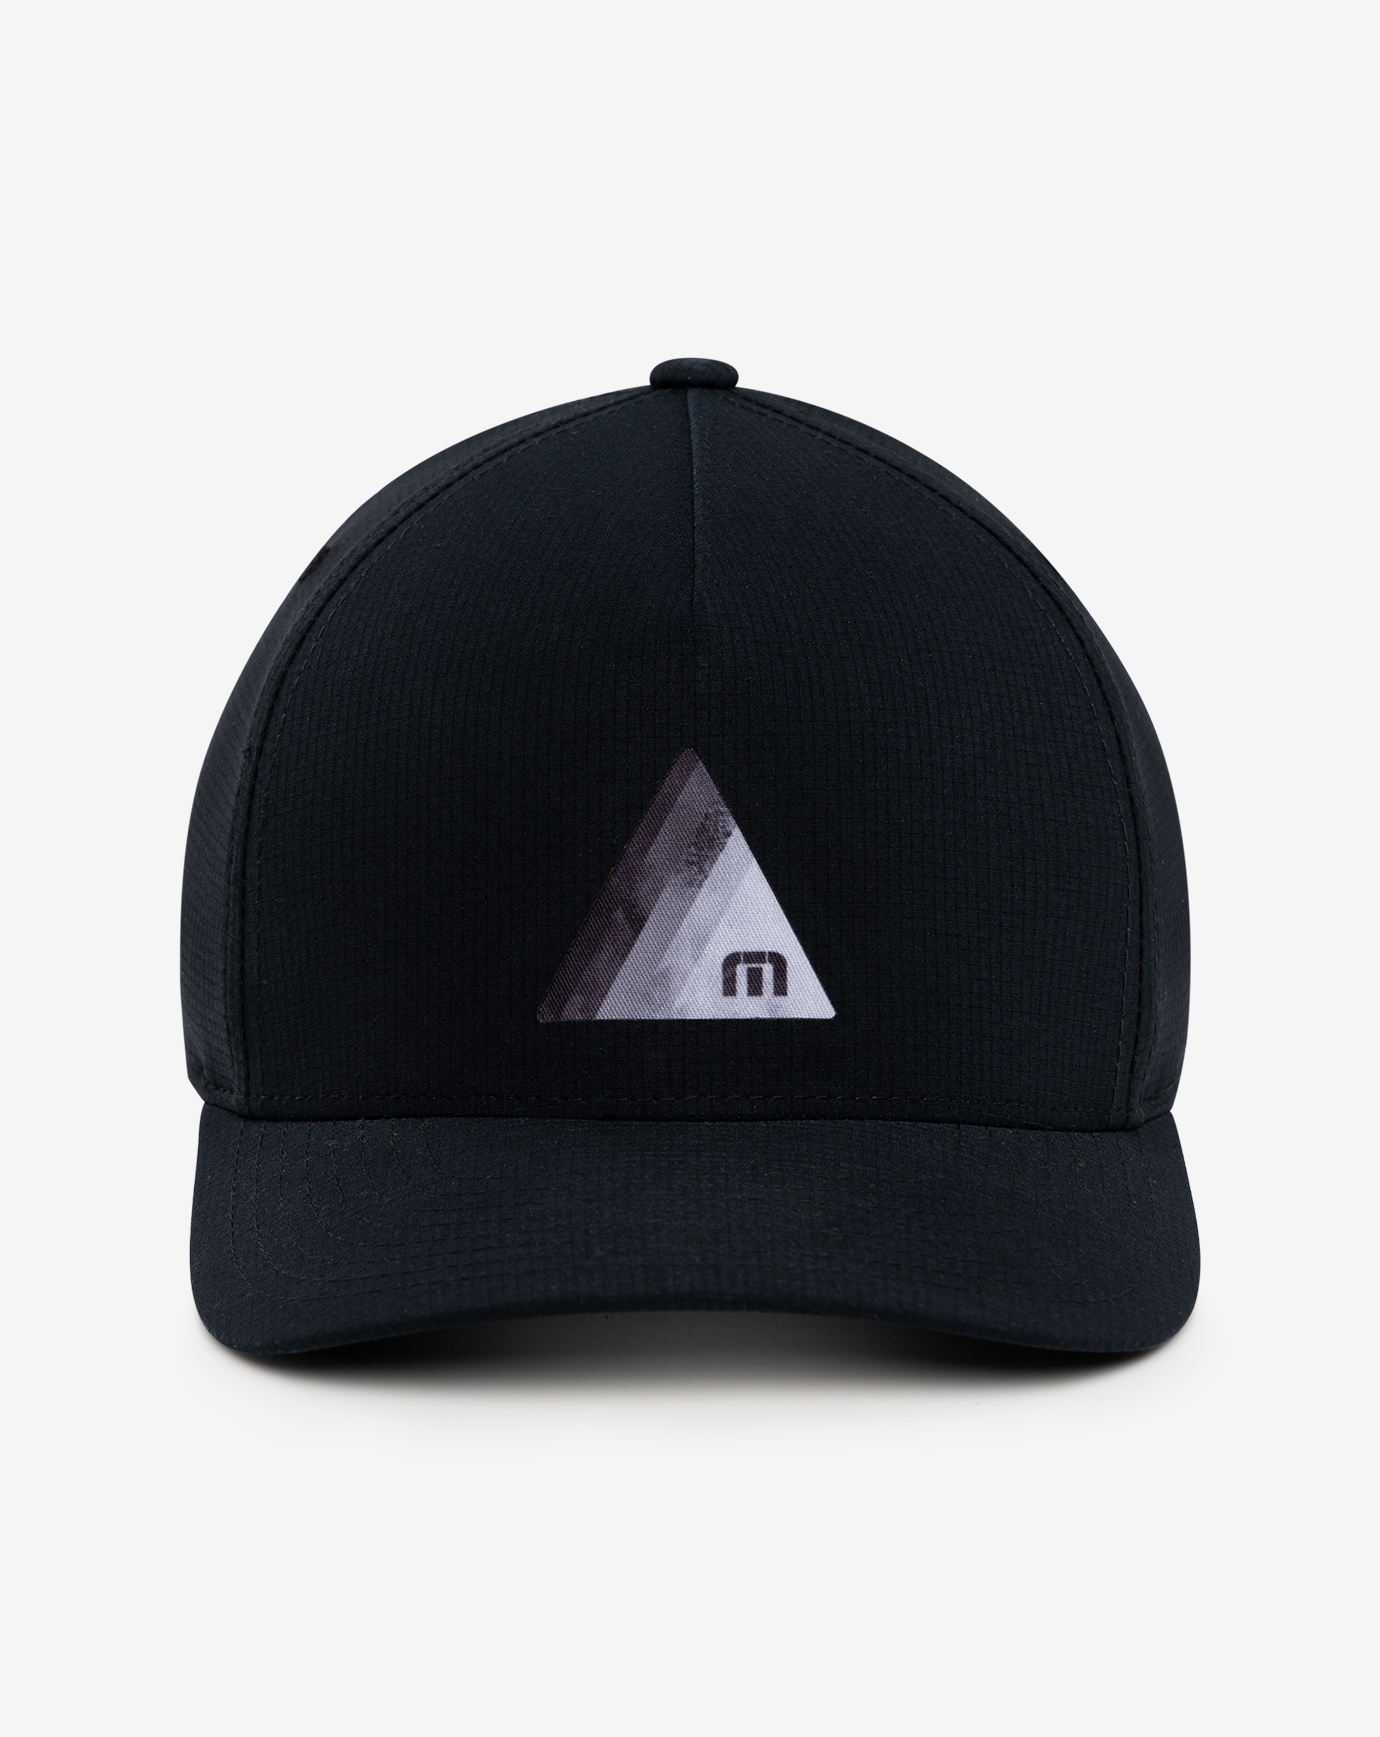 Related Product - THE HEATER SNAPBACK HAT